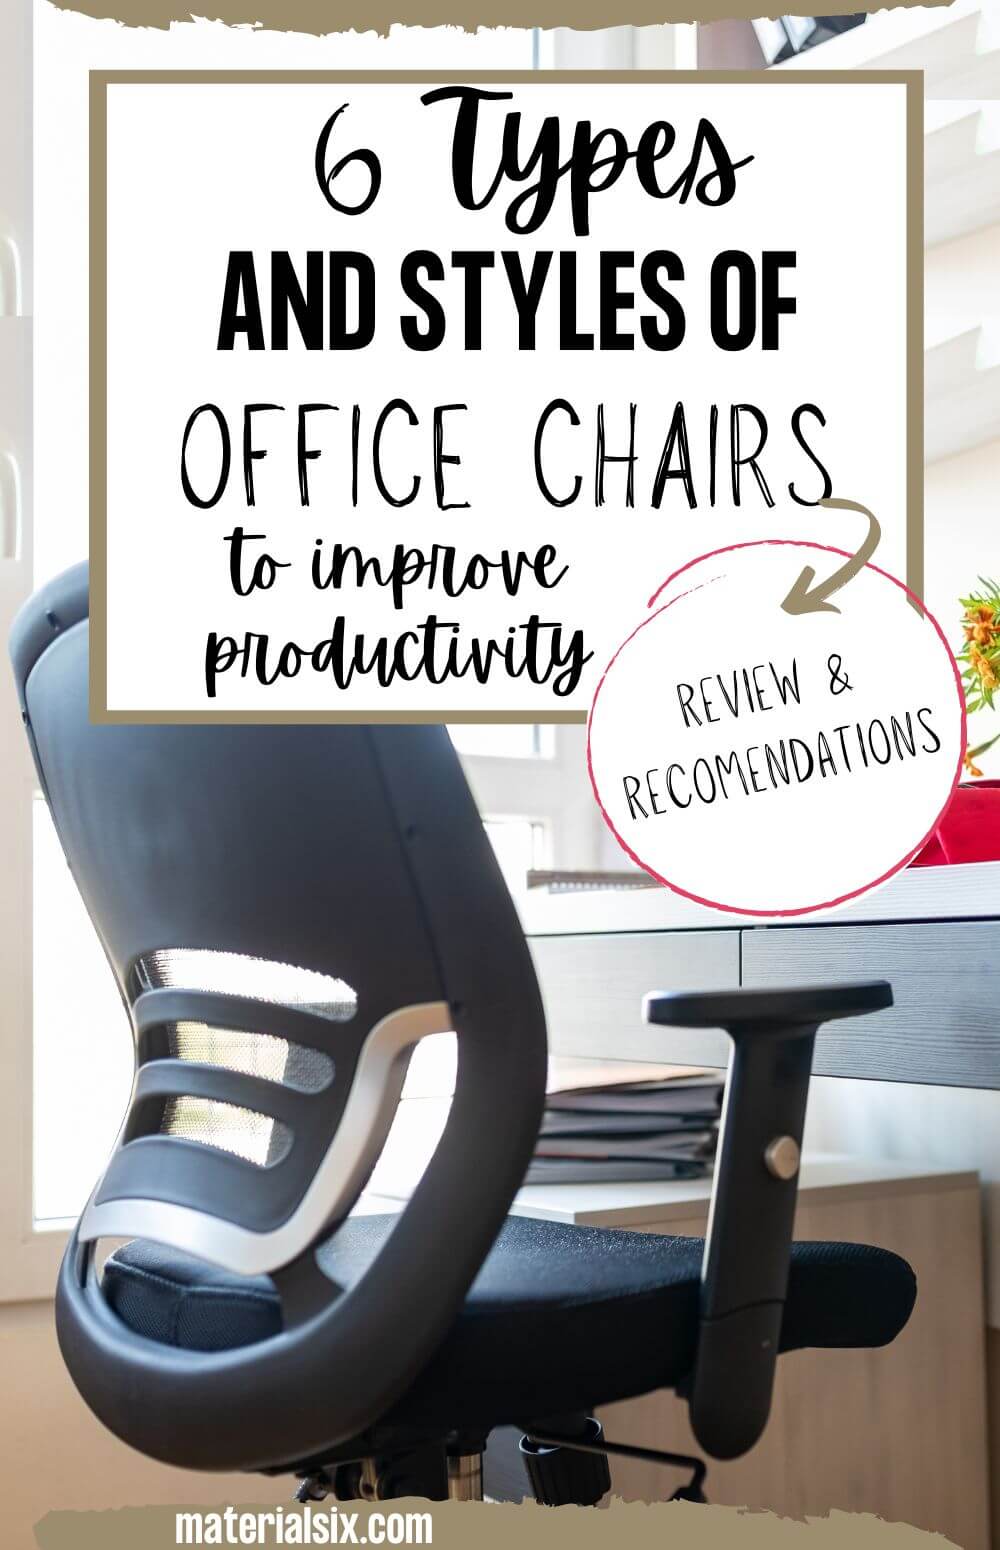 Types & Styles of Office Chairs